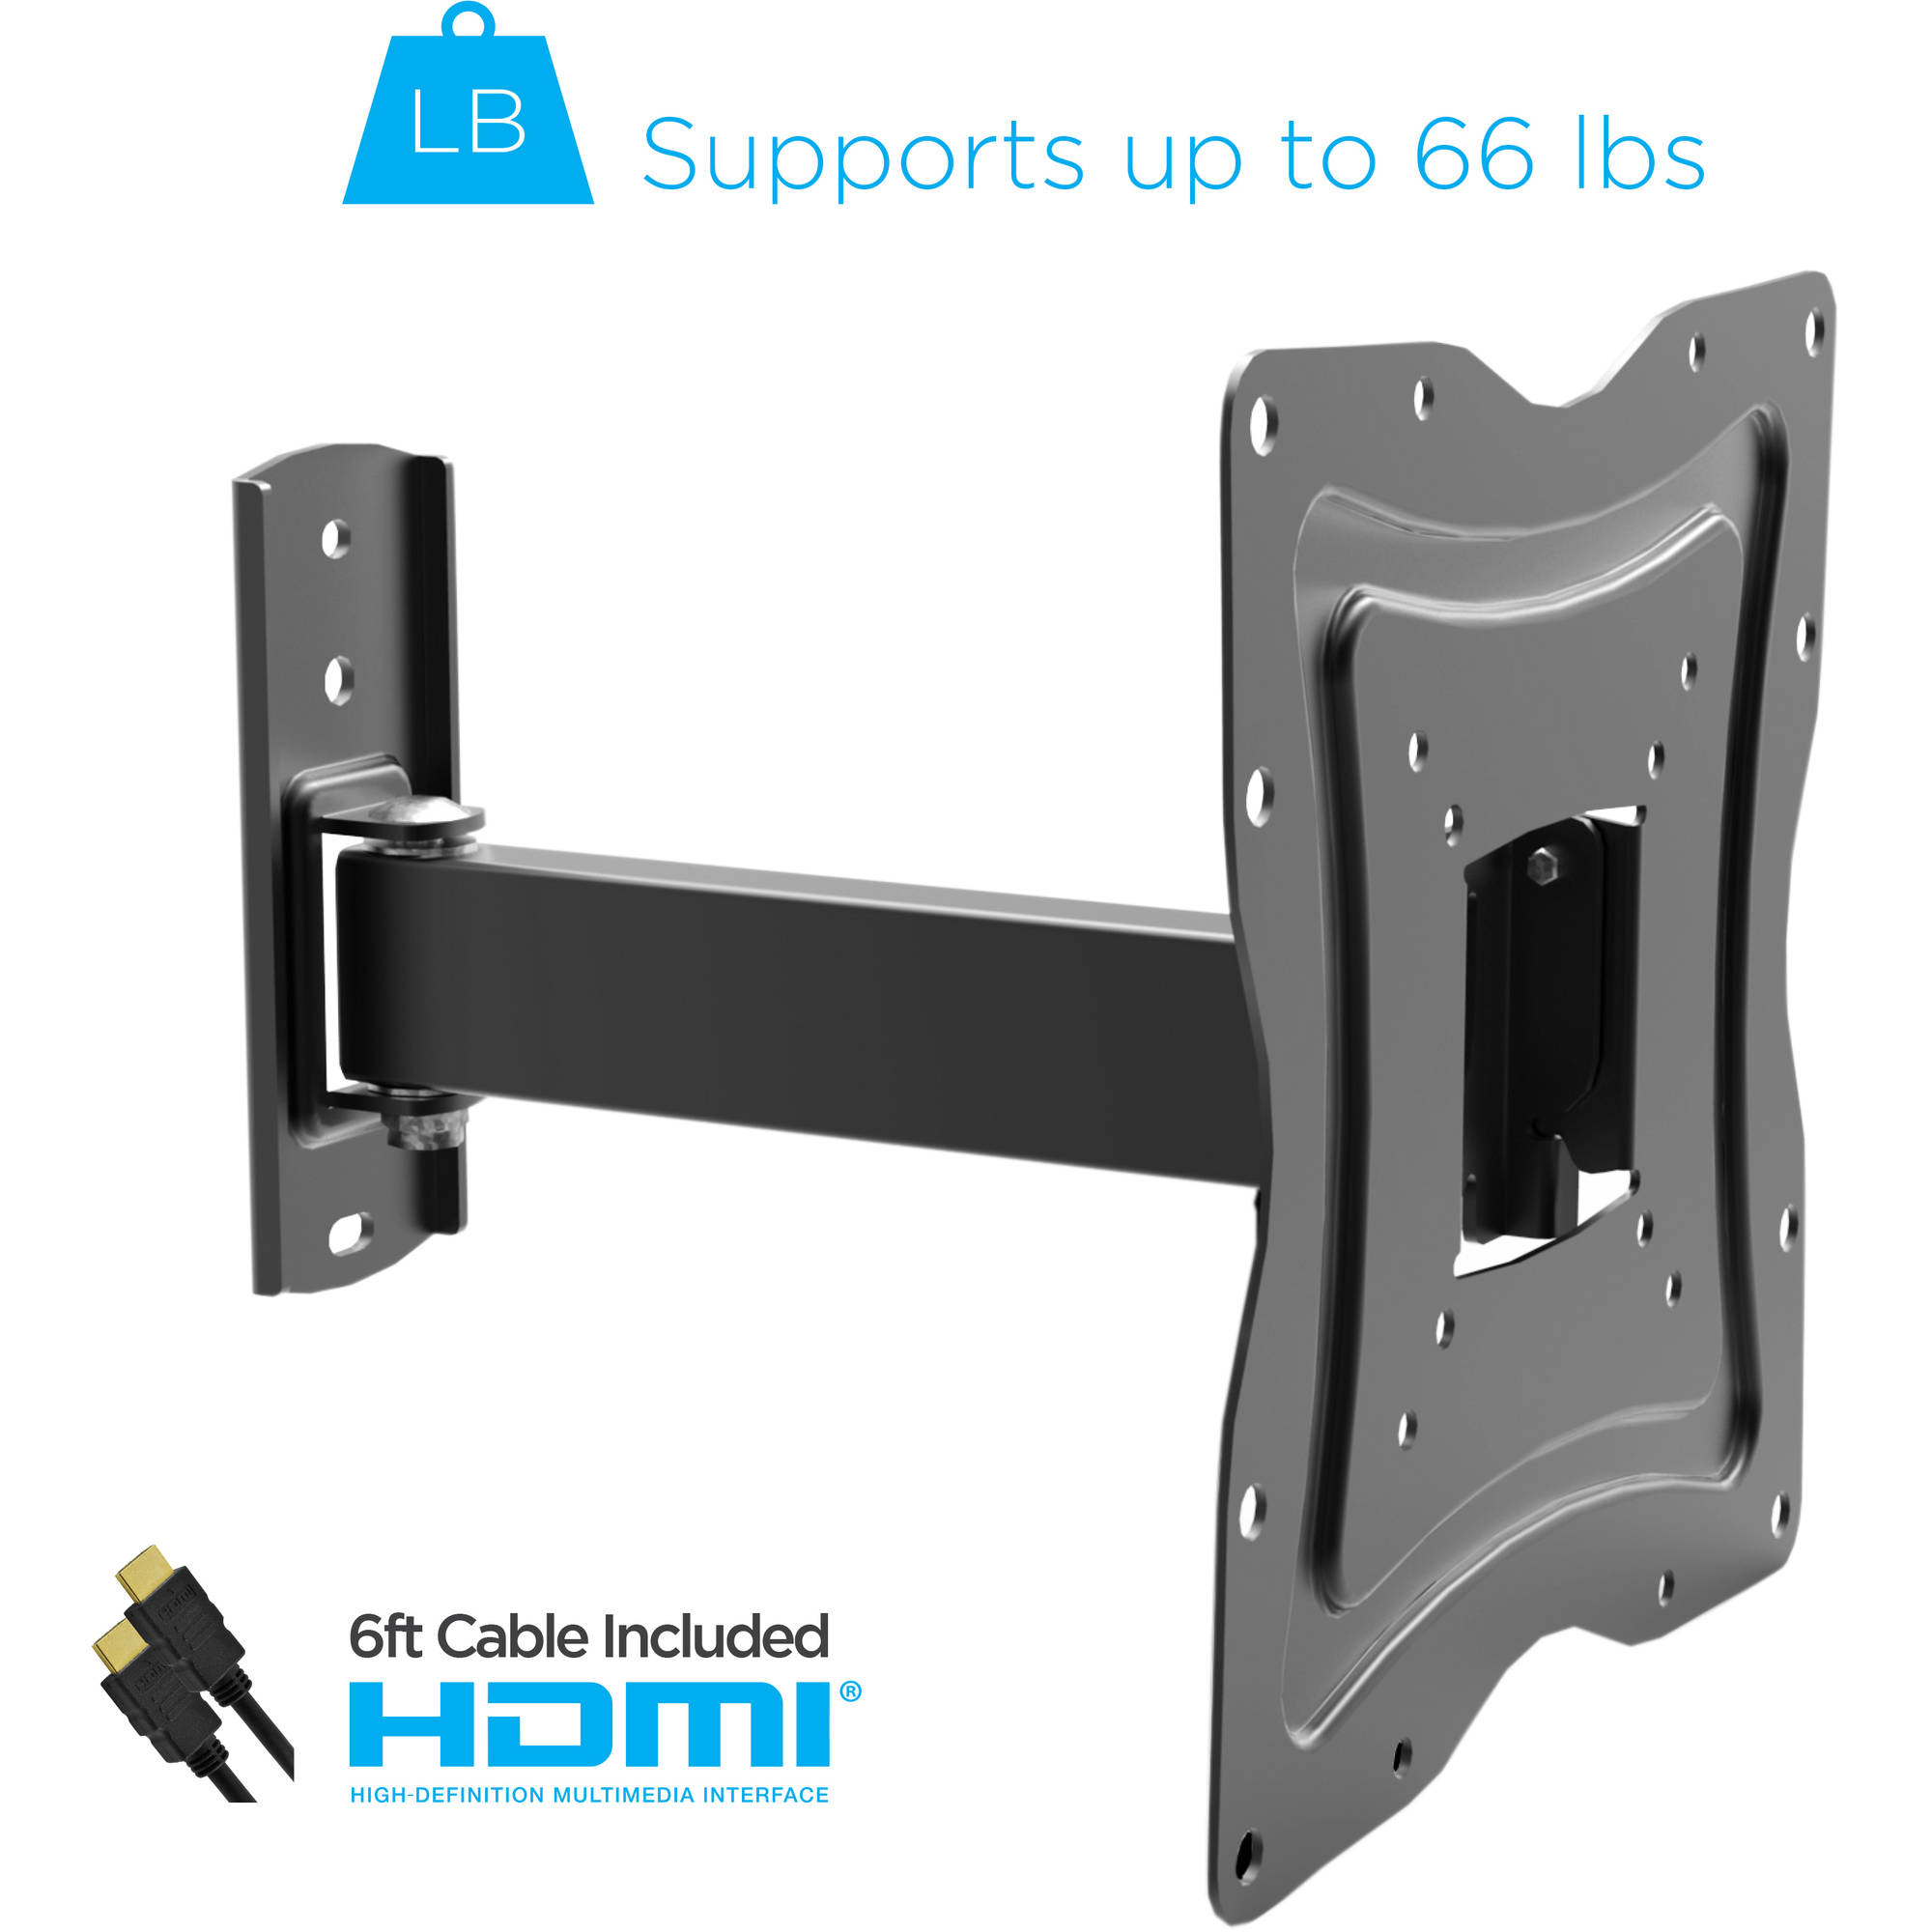 Full Motion TV Wall Mount 10" to 50" TV Display Tilt, Swivel Articulating Arm, HDMI Cable Included - image 3 of 7